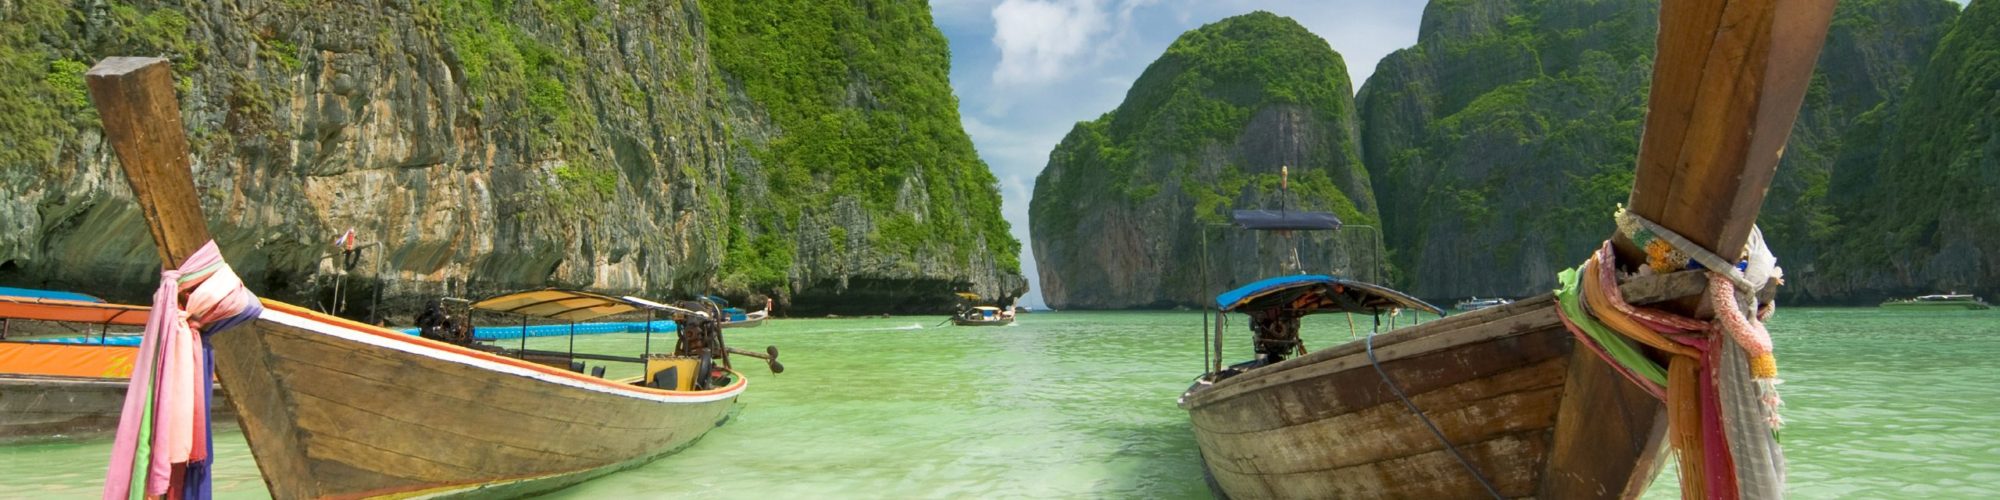 Phuket Travel travel agents packages deals